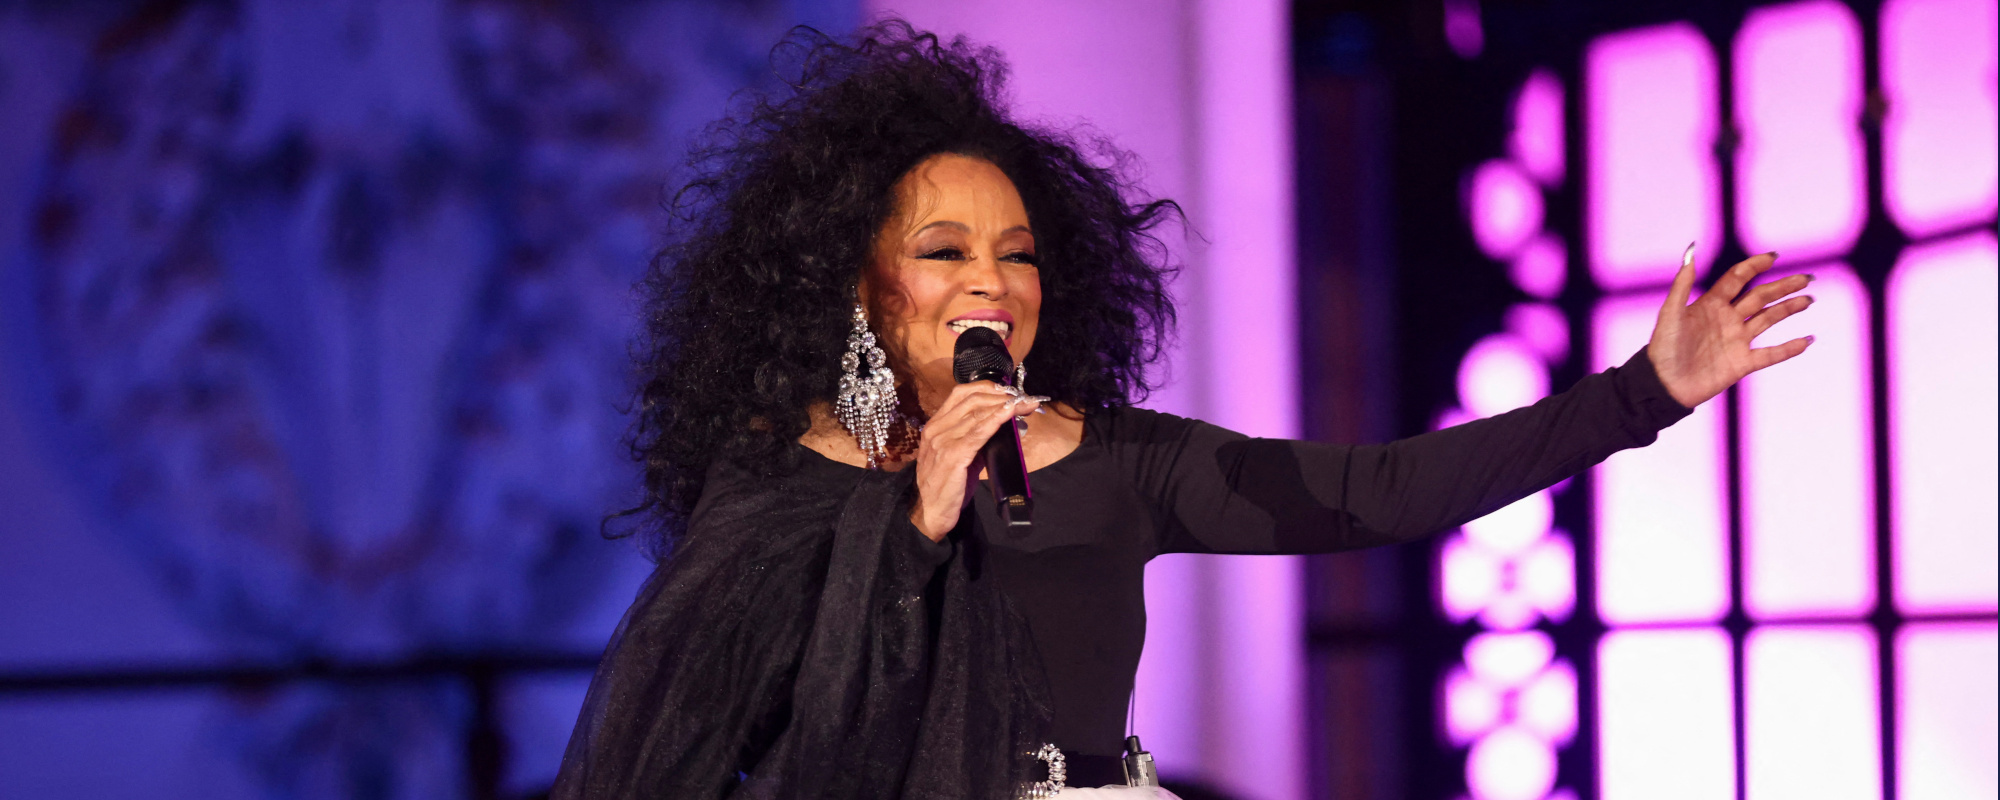 Diana Ross Gives Showstopping Performance at Radio City Music Hall